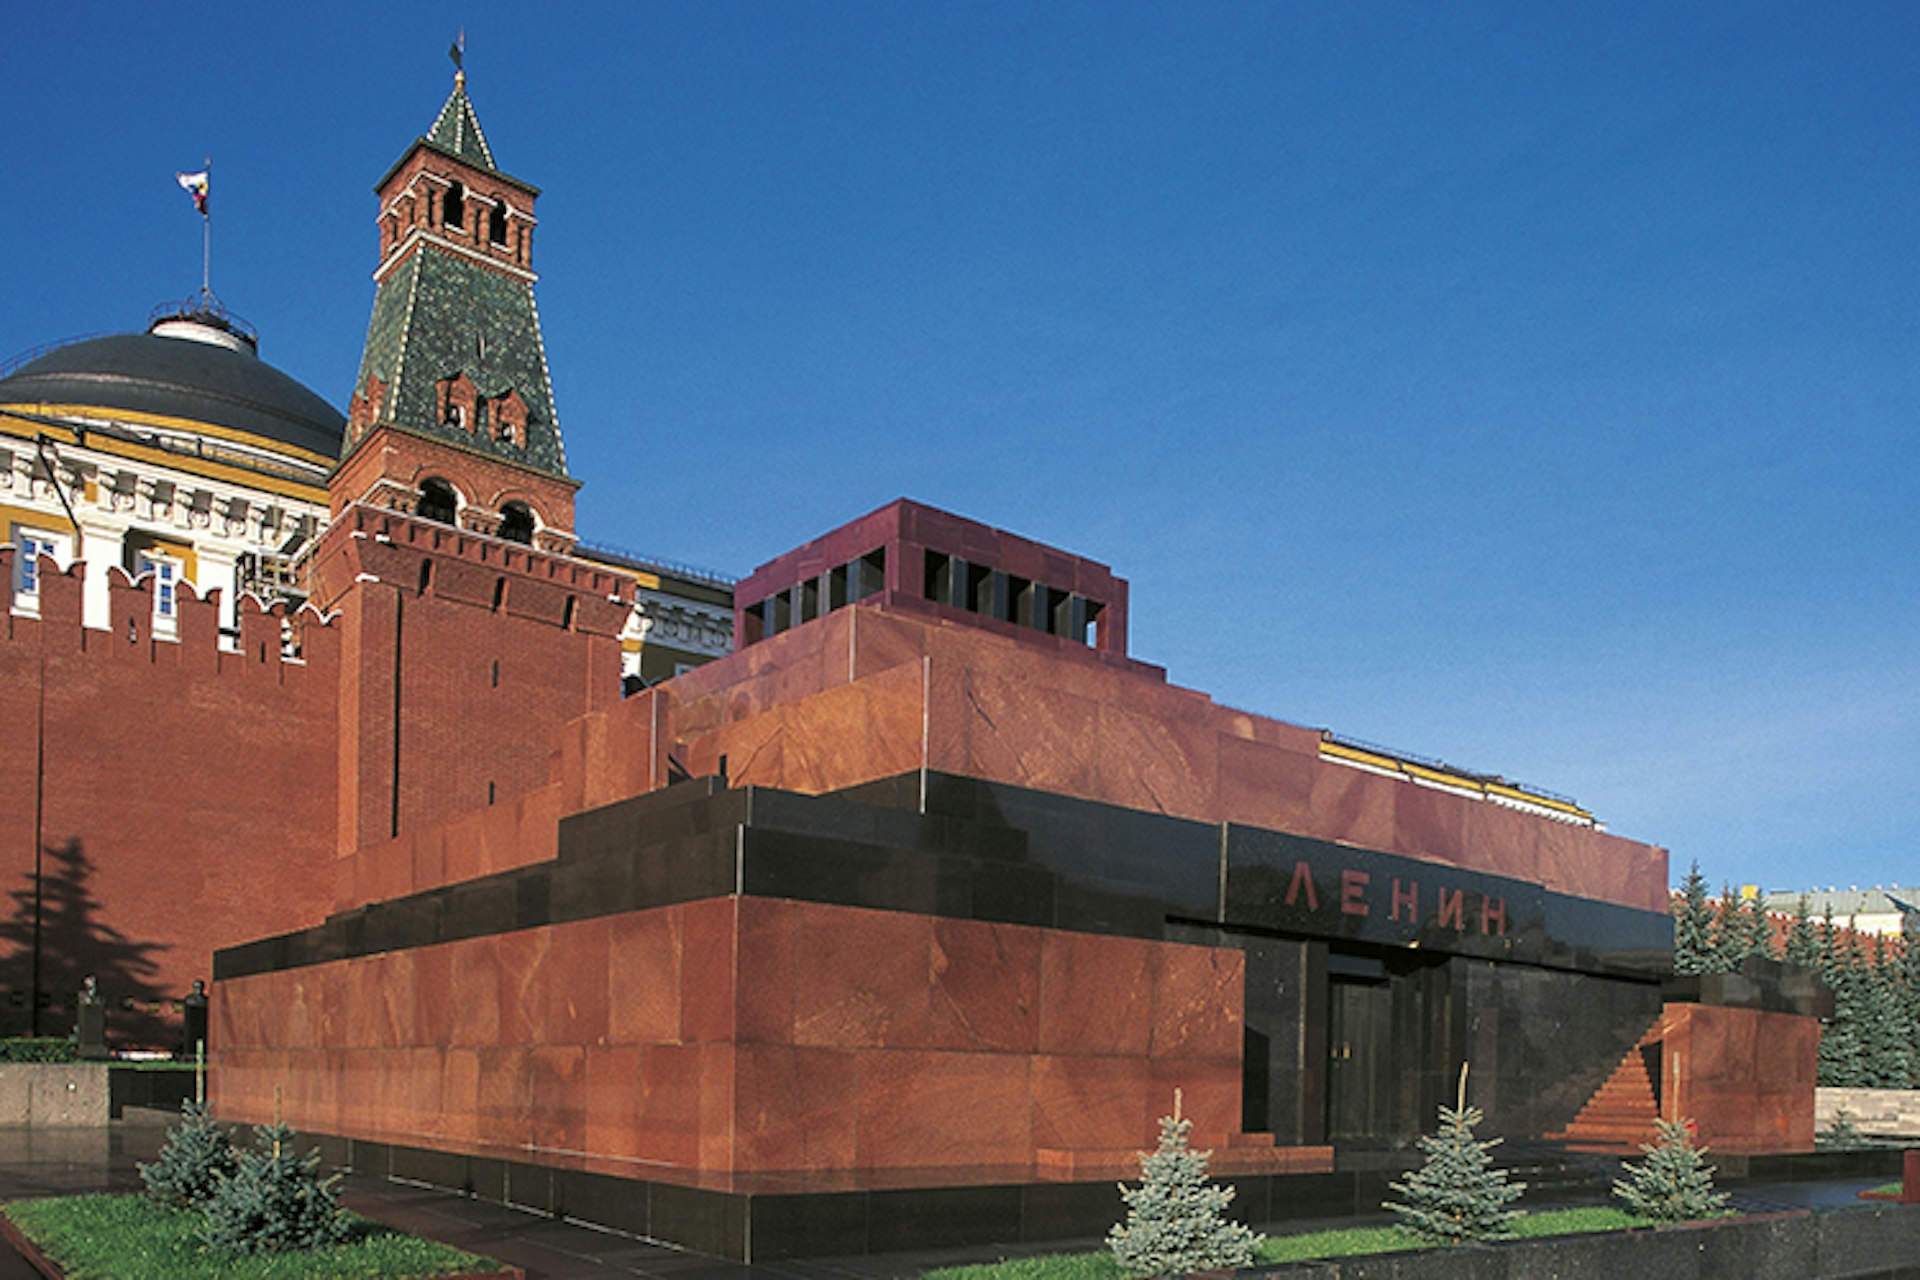 The tomb of Vladimir Lenin in Red Square. Image by DEA / W. BUSS De Agostini Picture Library / Getty Images